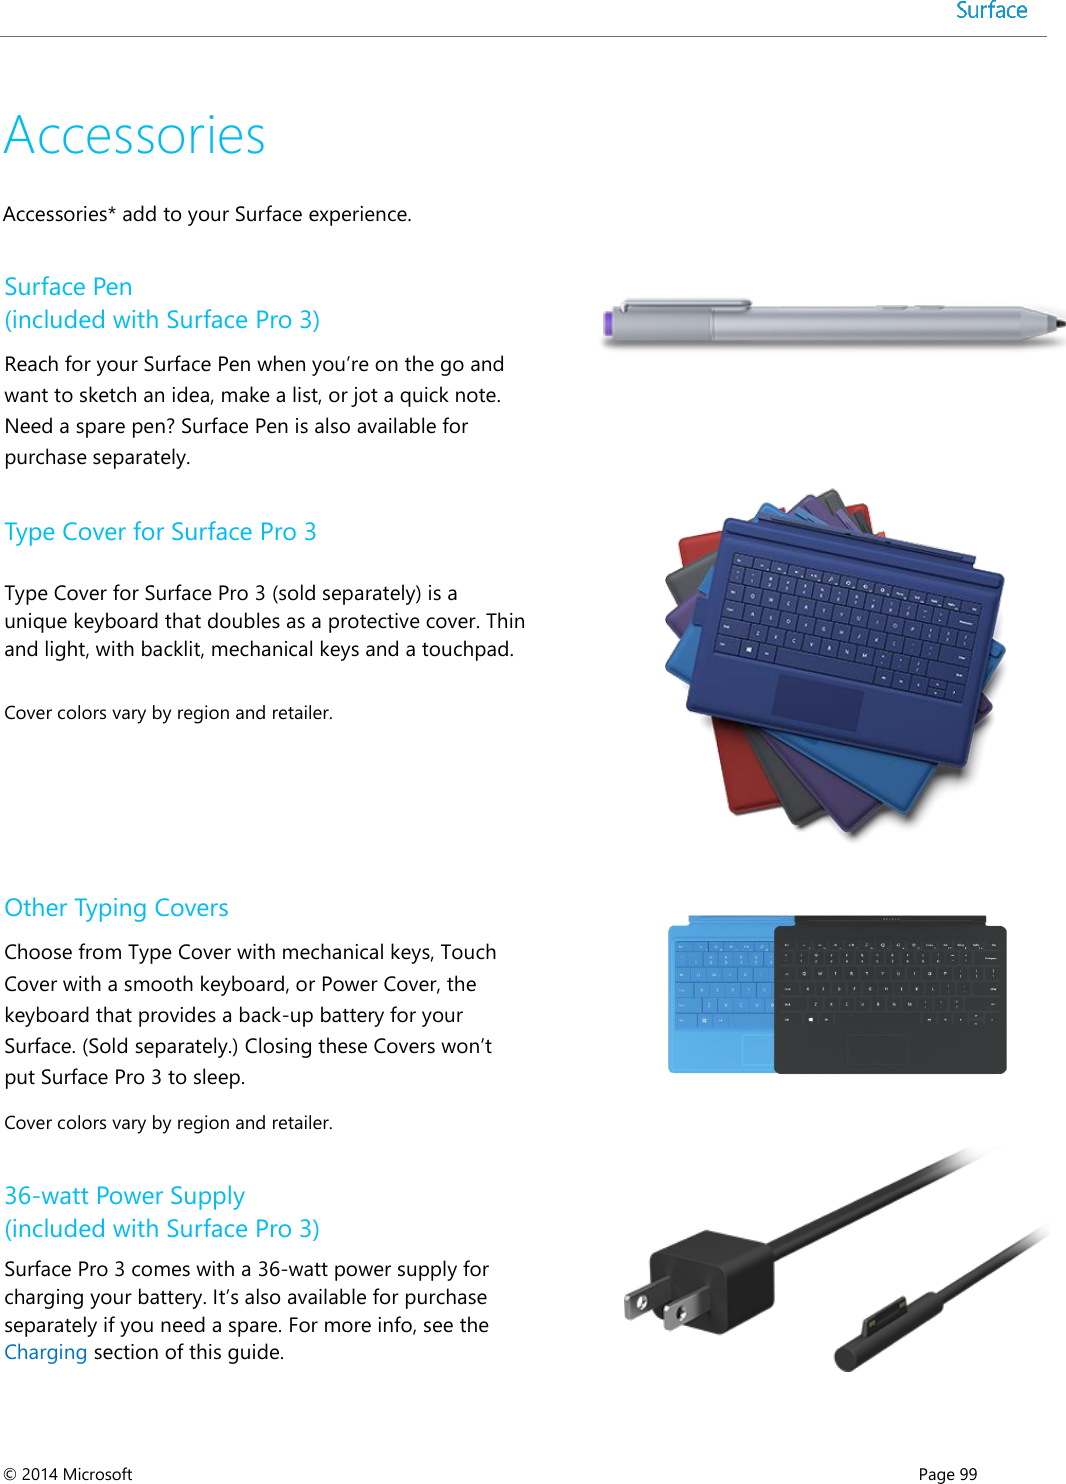  © 2014 Microsoft      Page 99  Accessories Accessories* add to your Surface experience. Surface Pen (included with Surface Pro 3) Reach for your Surface Pen when you’re on the go and want to sketch an idea, make a list, or jot a quick note. Need a spare pen? Surface Pen is also available for purchase separately.   Type Cover for Surface Pro 3 Type Cover for Surface Pro 3 (sold separately) is a unique keyboard that doubles as a protective cover. Thin and light, with backlit, mechanical keys and a touchpad.   Cover colors vary by region and retailer.  Other Typing Covers Choose from Type Cover with mechanical keys, Touch Cover with a smooth keyboard, or Power Cover, the keyboard that provides a back-up battery for your Surface. (Sold separately.) Closing these Covers won’t put Surface Pro 3 to sleep. Cover colors vary by region and retailer.  36-watt Power Supply  (included with Surface Pro 3) Surface Pro 3 comes with a 36-watt power supply for charging your battery. It’s also available for purchase separately if you need a spare. For more info, see the Charging section of this guide.  